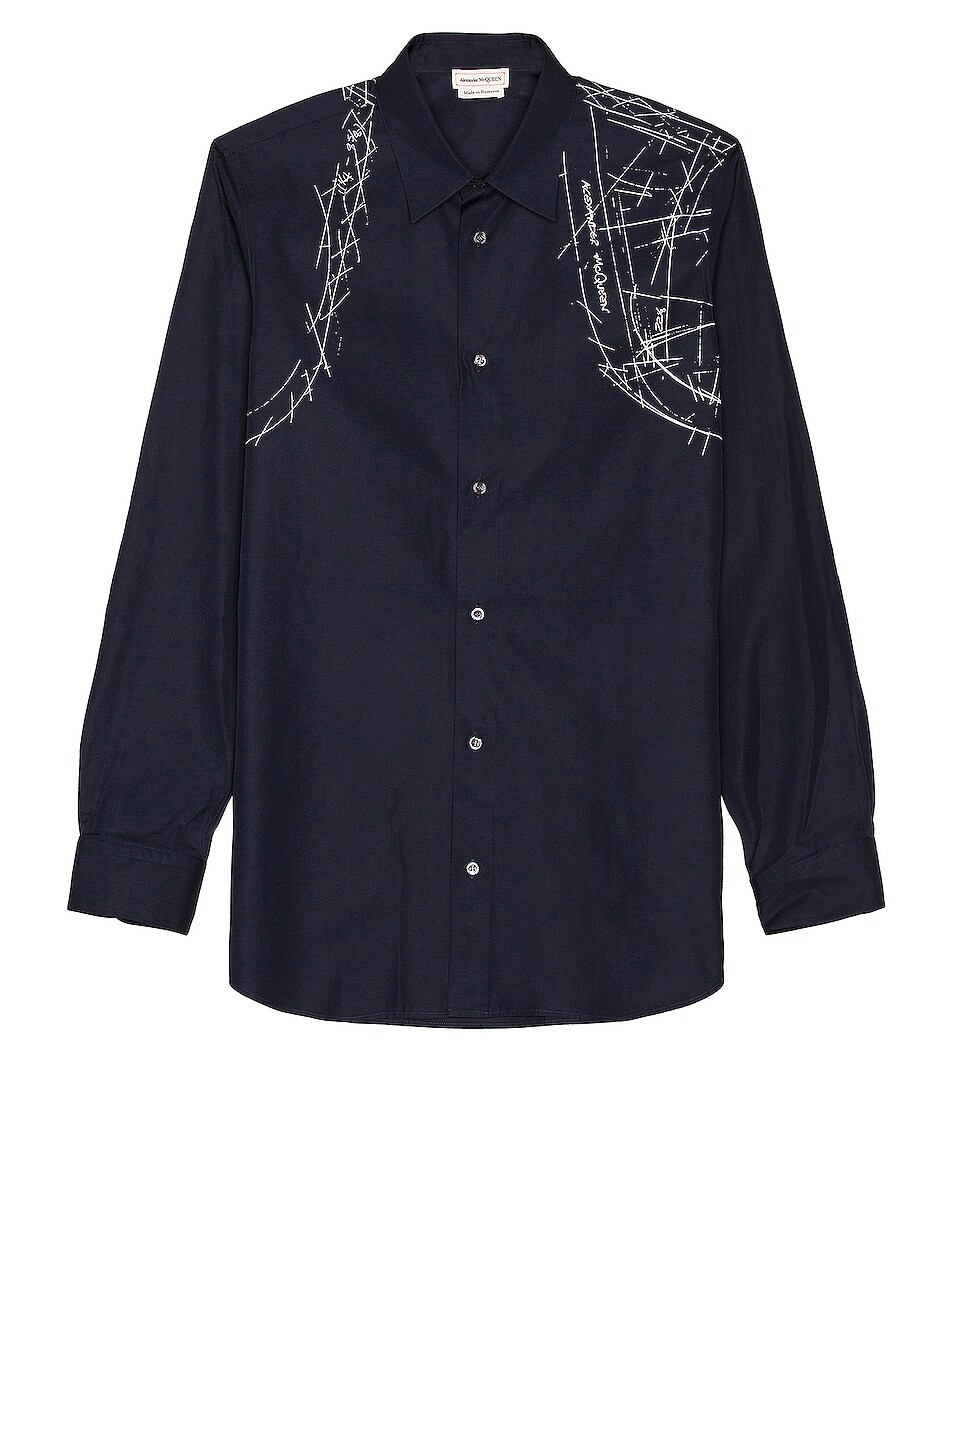 Image 1 of Alexander McQueen LS Printed Shirt in Ink Blue & Ivory